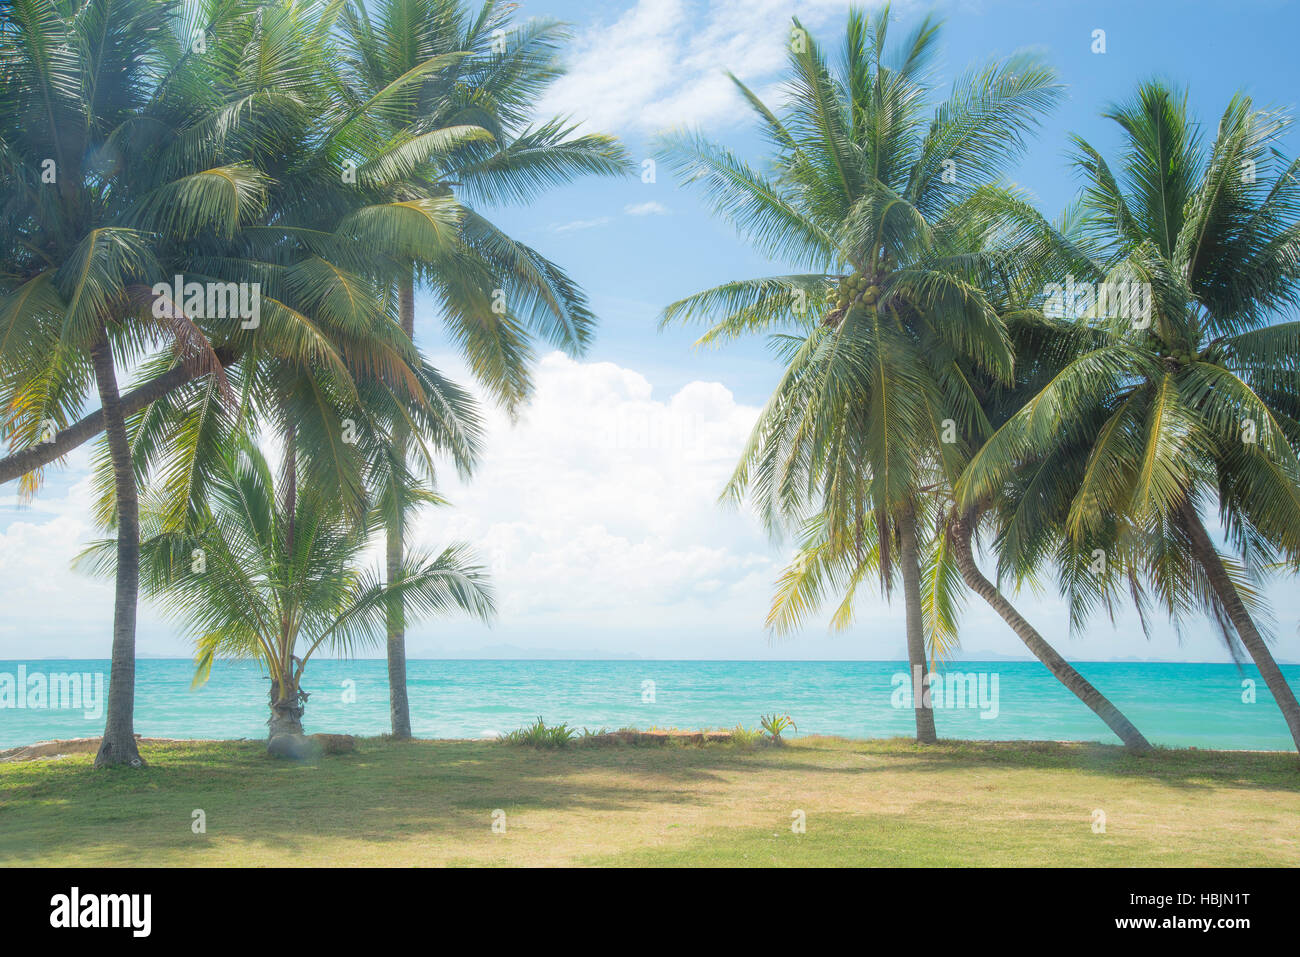 Lovely landscape photography of seaside scenery with palms, blue sky and clear water. Taken in asia holiday destination of Samui Island, Thailand. Stock Photo